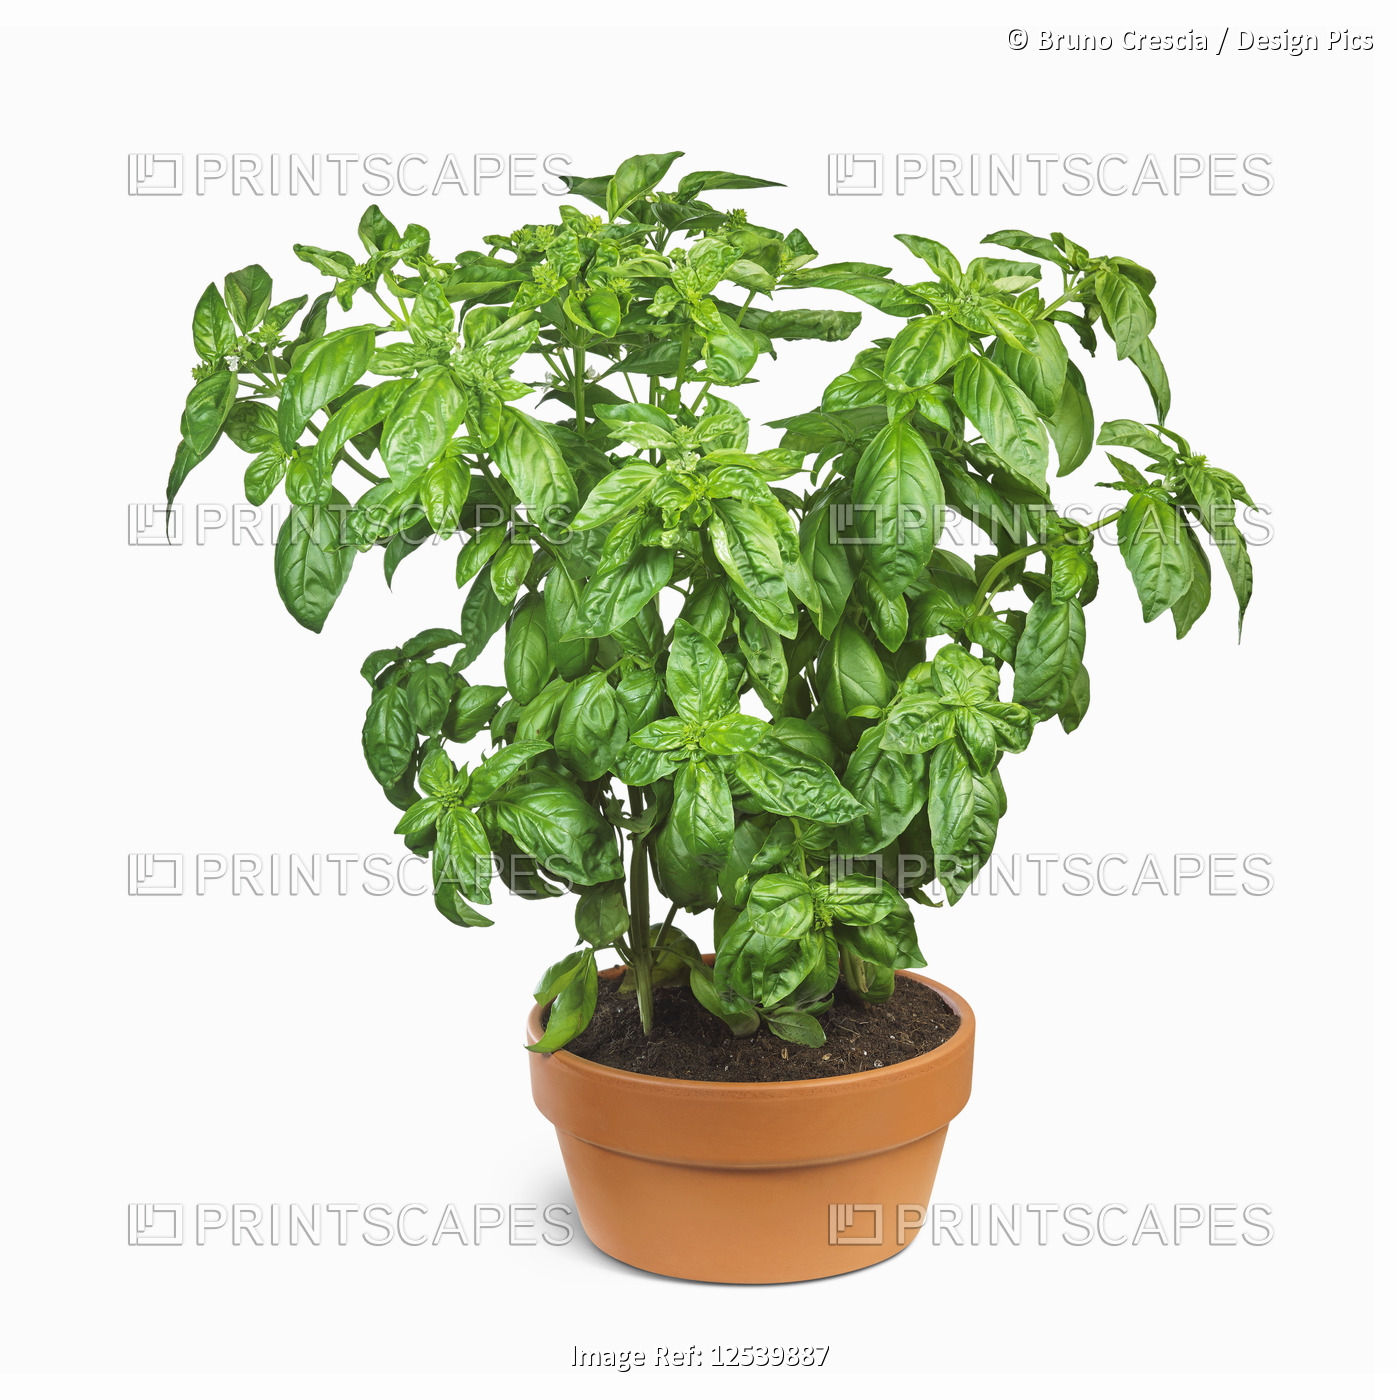 Organic basil plant growing in a pot on a white background